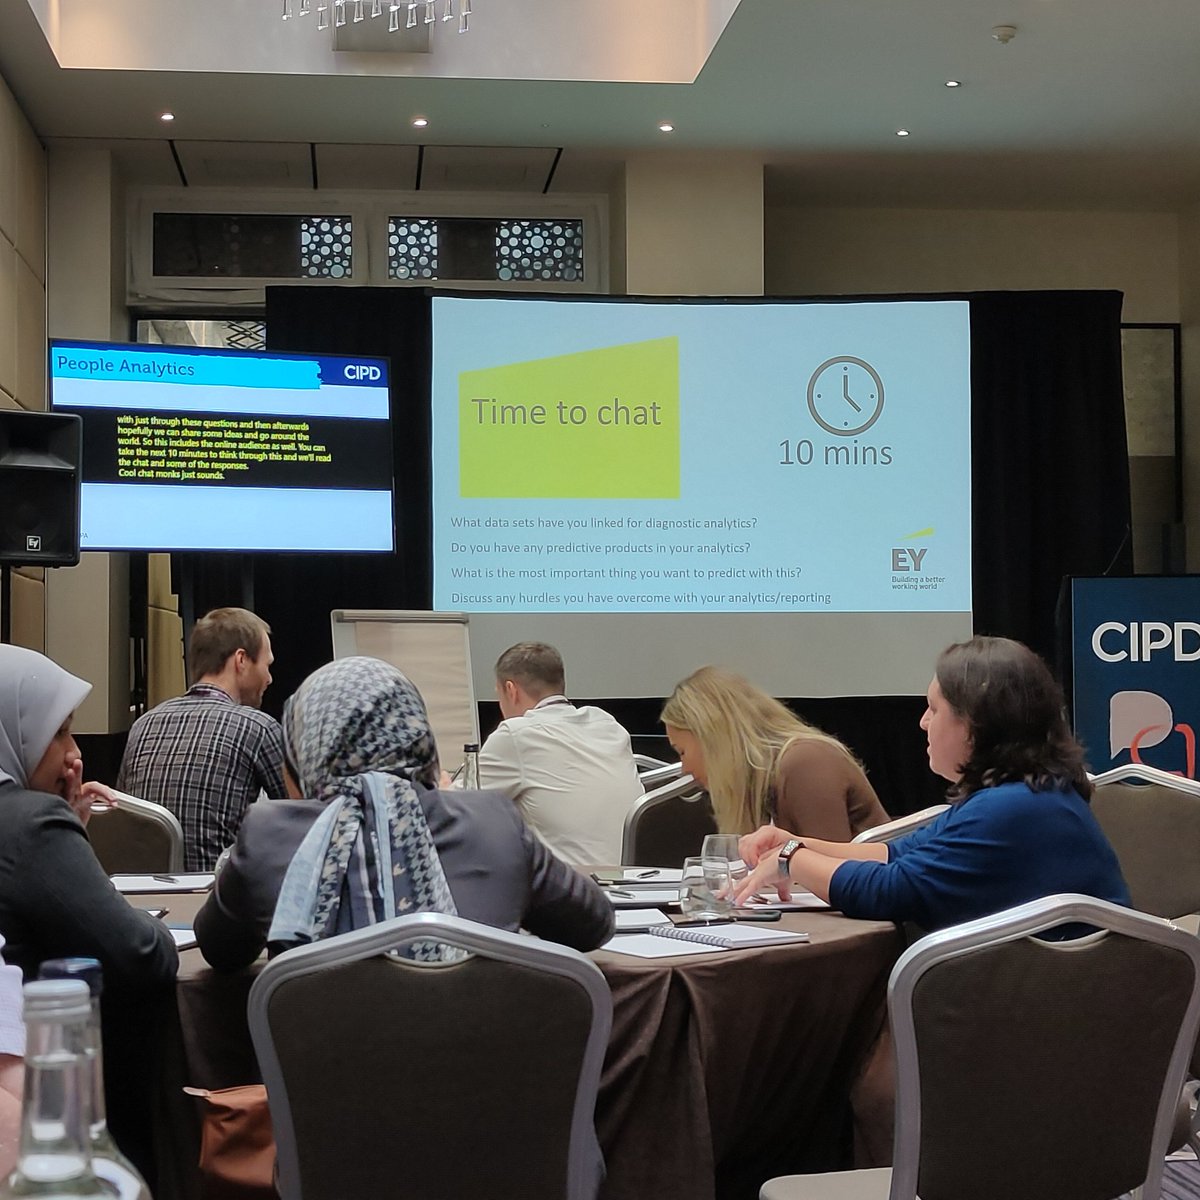 The @CIPD people #Analytics conference is underway. Challenging opening by @AbbyGKGilbert @Institute_FoW and now workshops by @GSK on getting started and @EY on next steps on the journey. #cipdPA